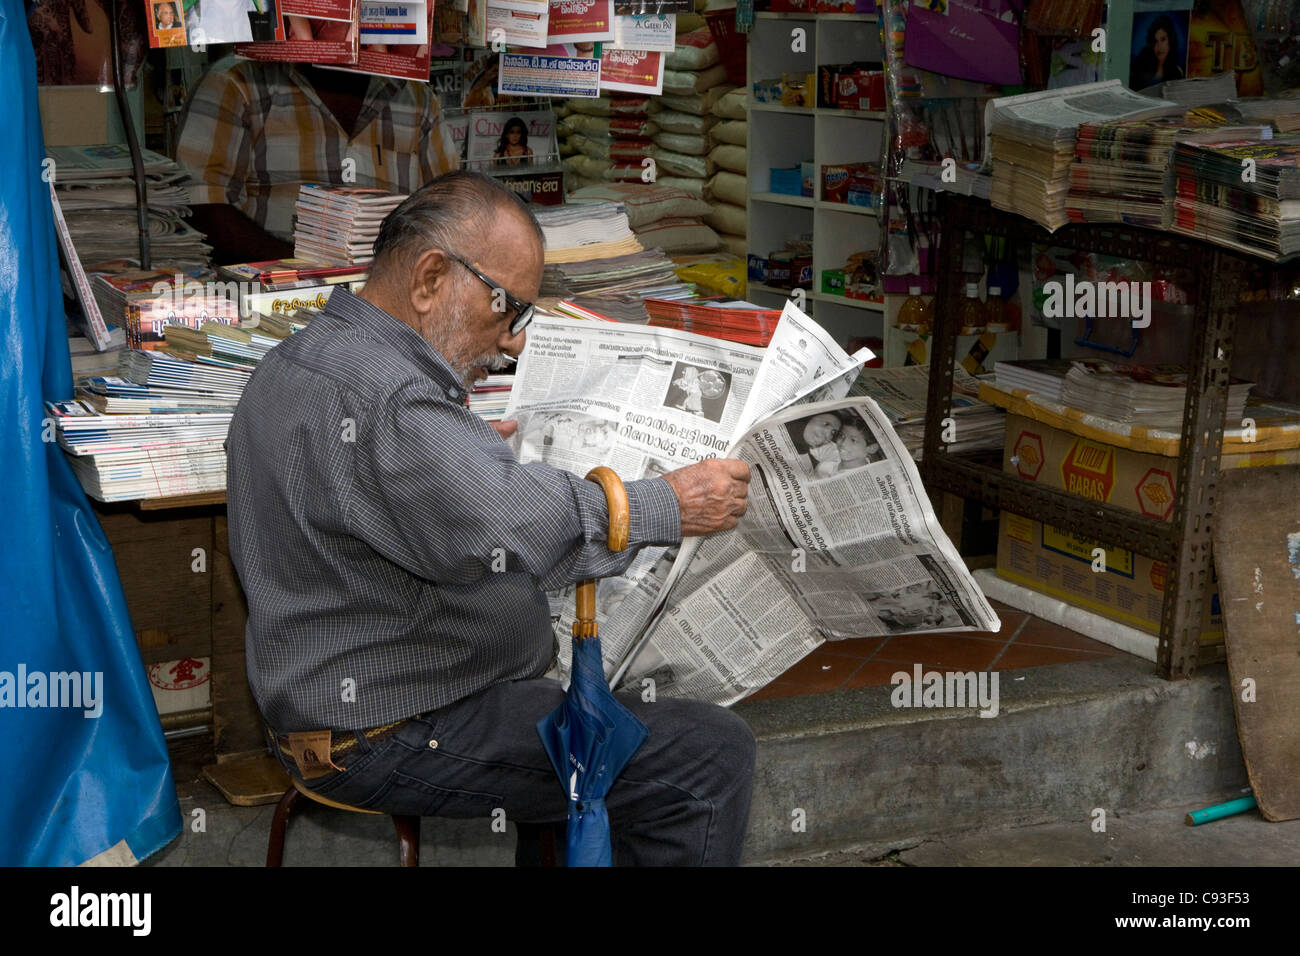 Little India: man with newspaper Stock Photo